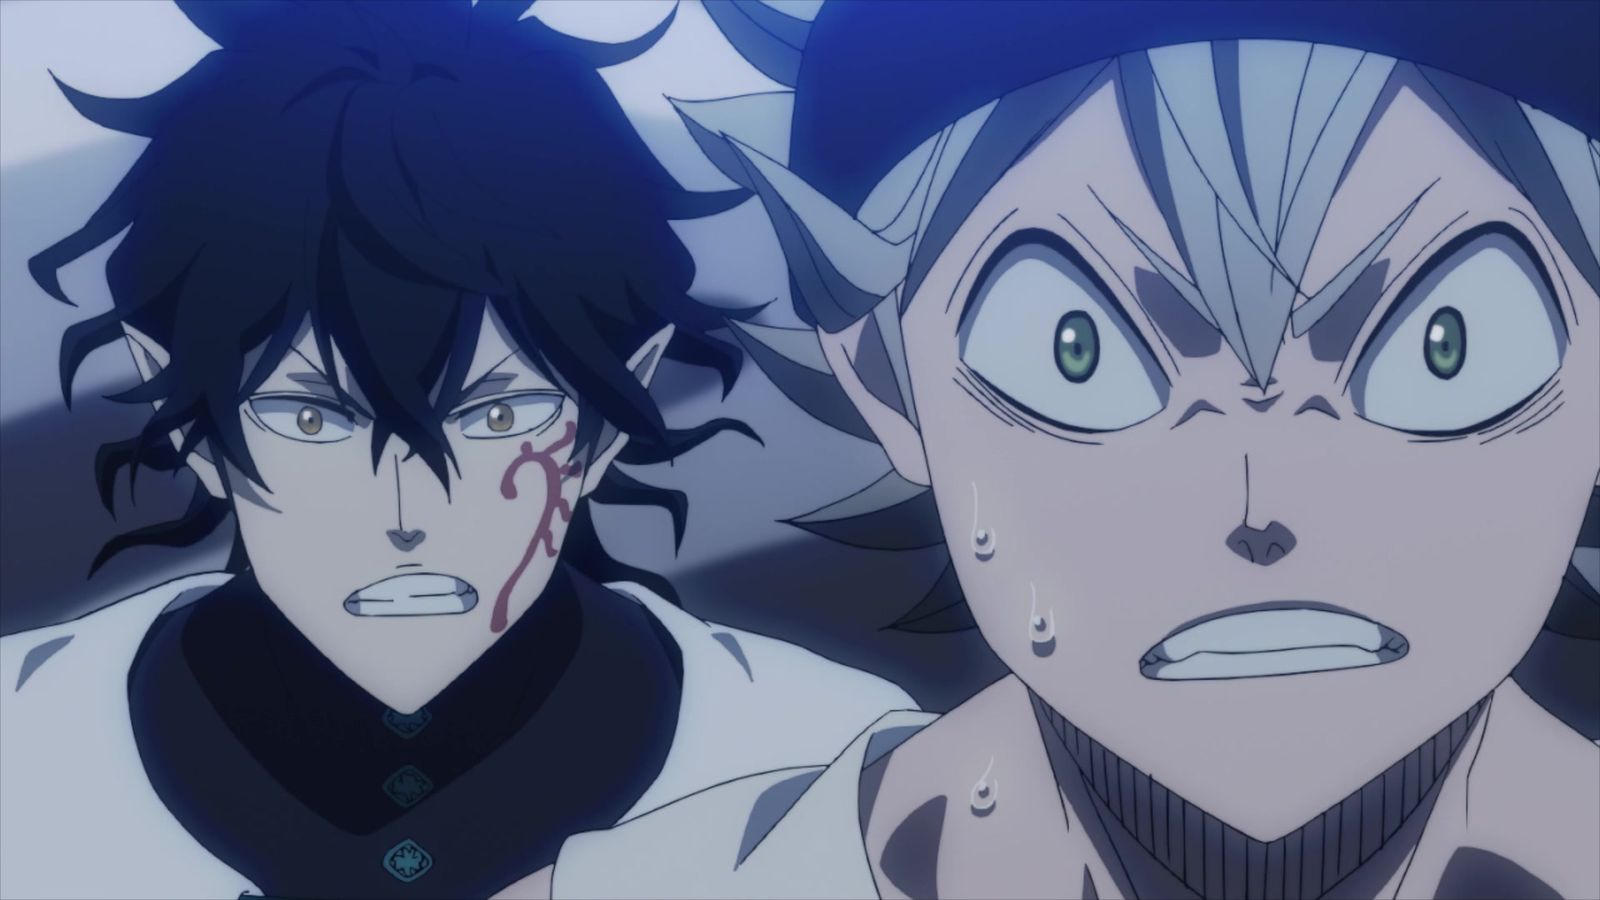 Black Clover Watch Order How to Watch Black Clover in Order Asta and Yuno